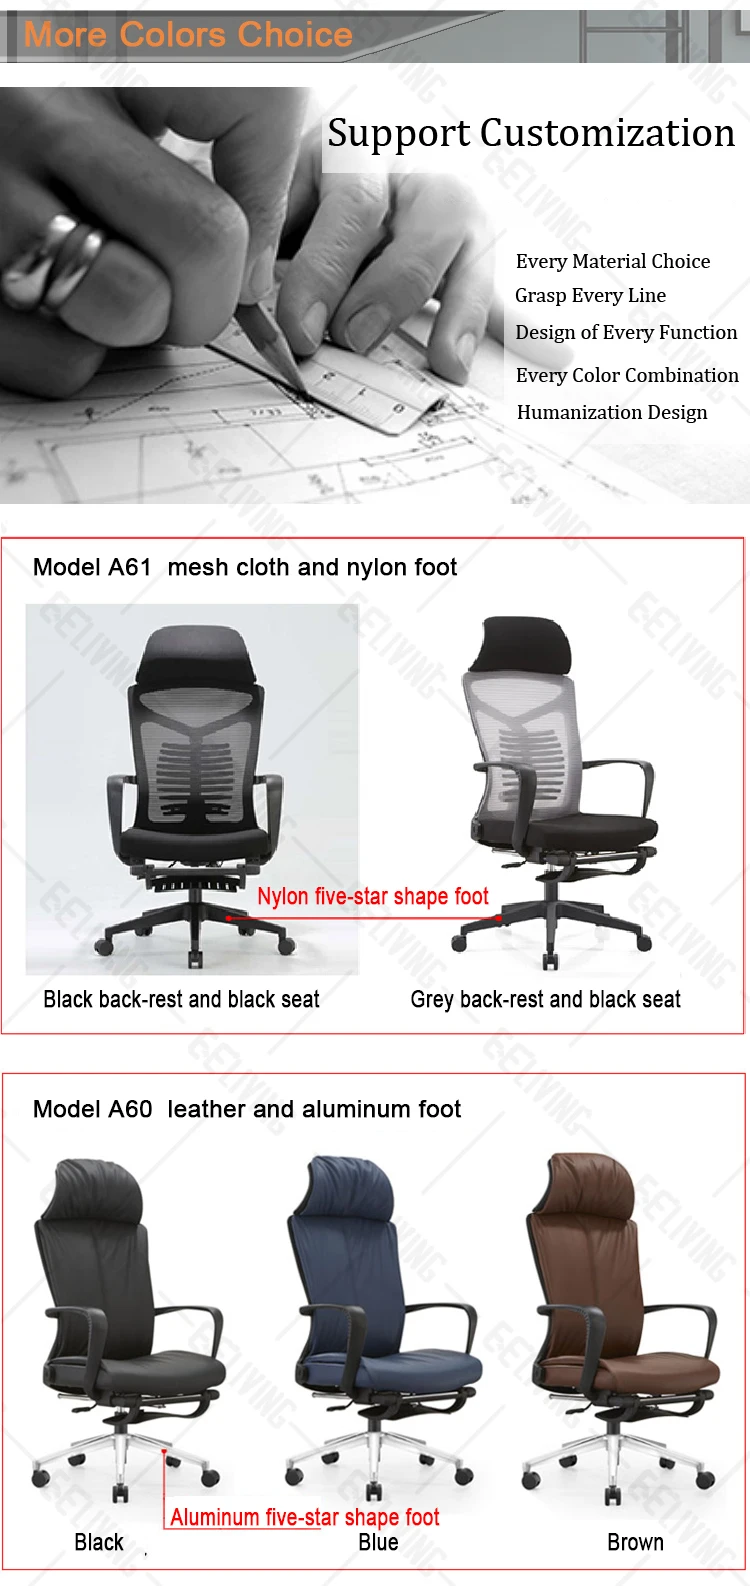 Luxury Colorful PC Silla Ergonomic Oficina Reclining Chair Leather Gaming Office Chair With Footrest